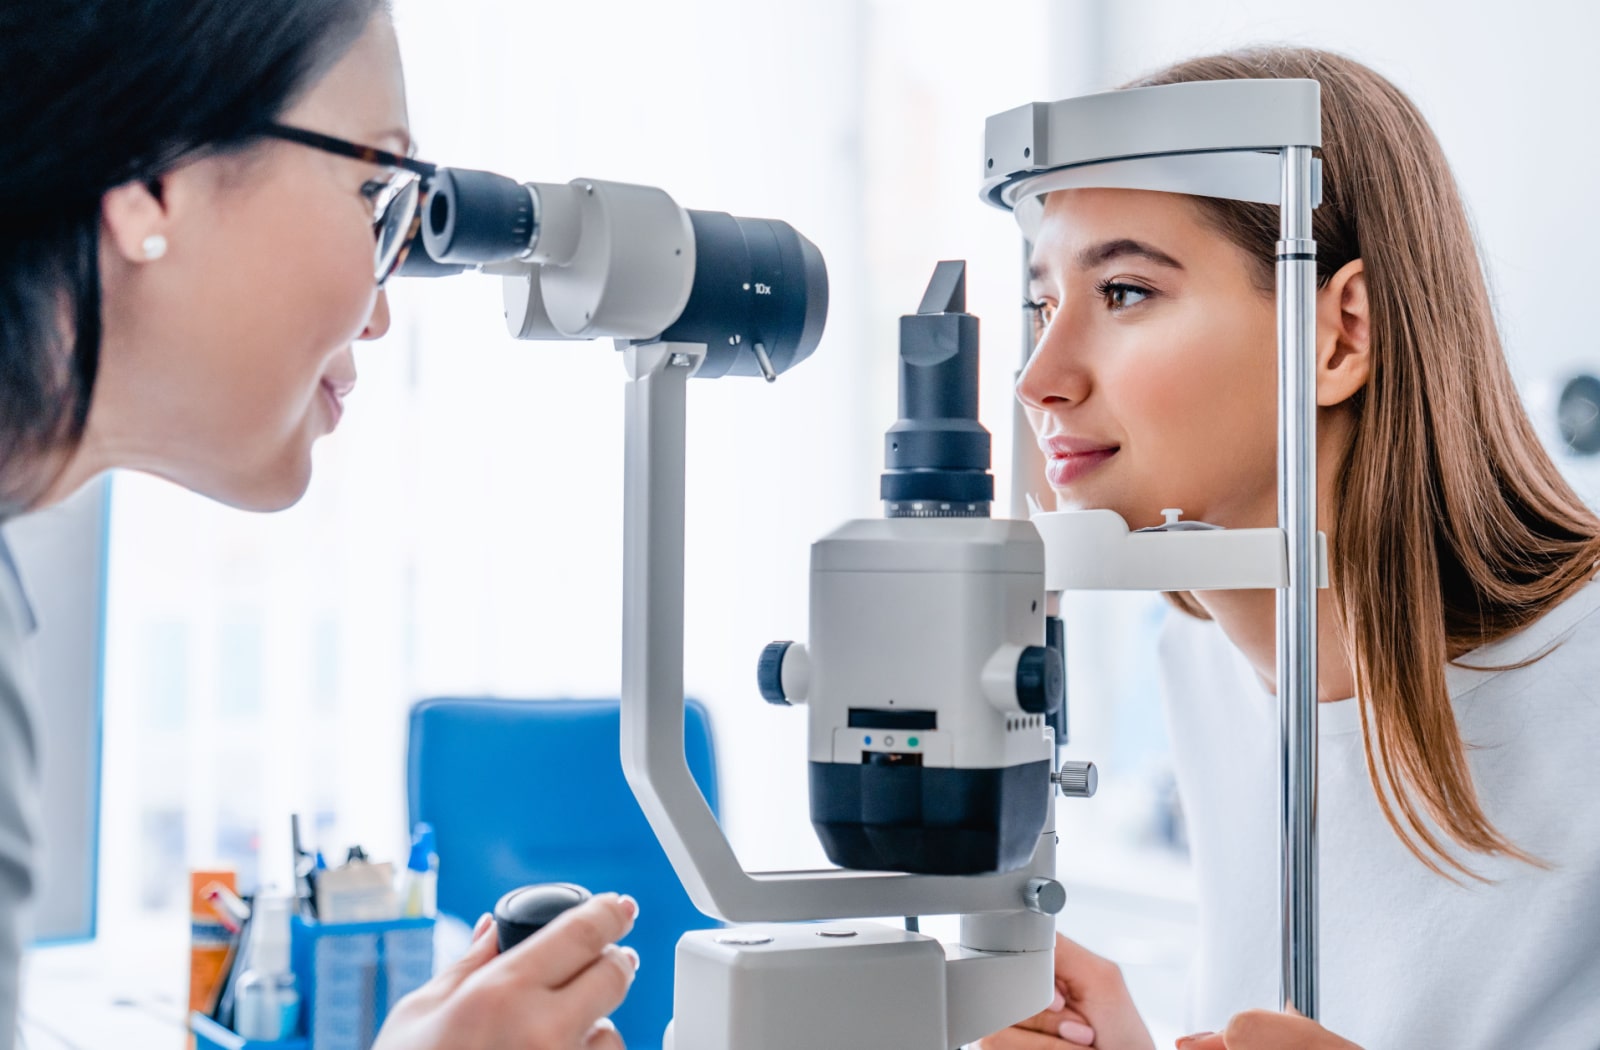 A female optometrist uses a slit lamp to examine a female patient's eyes